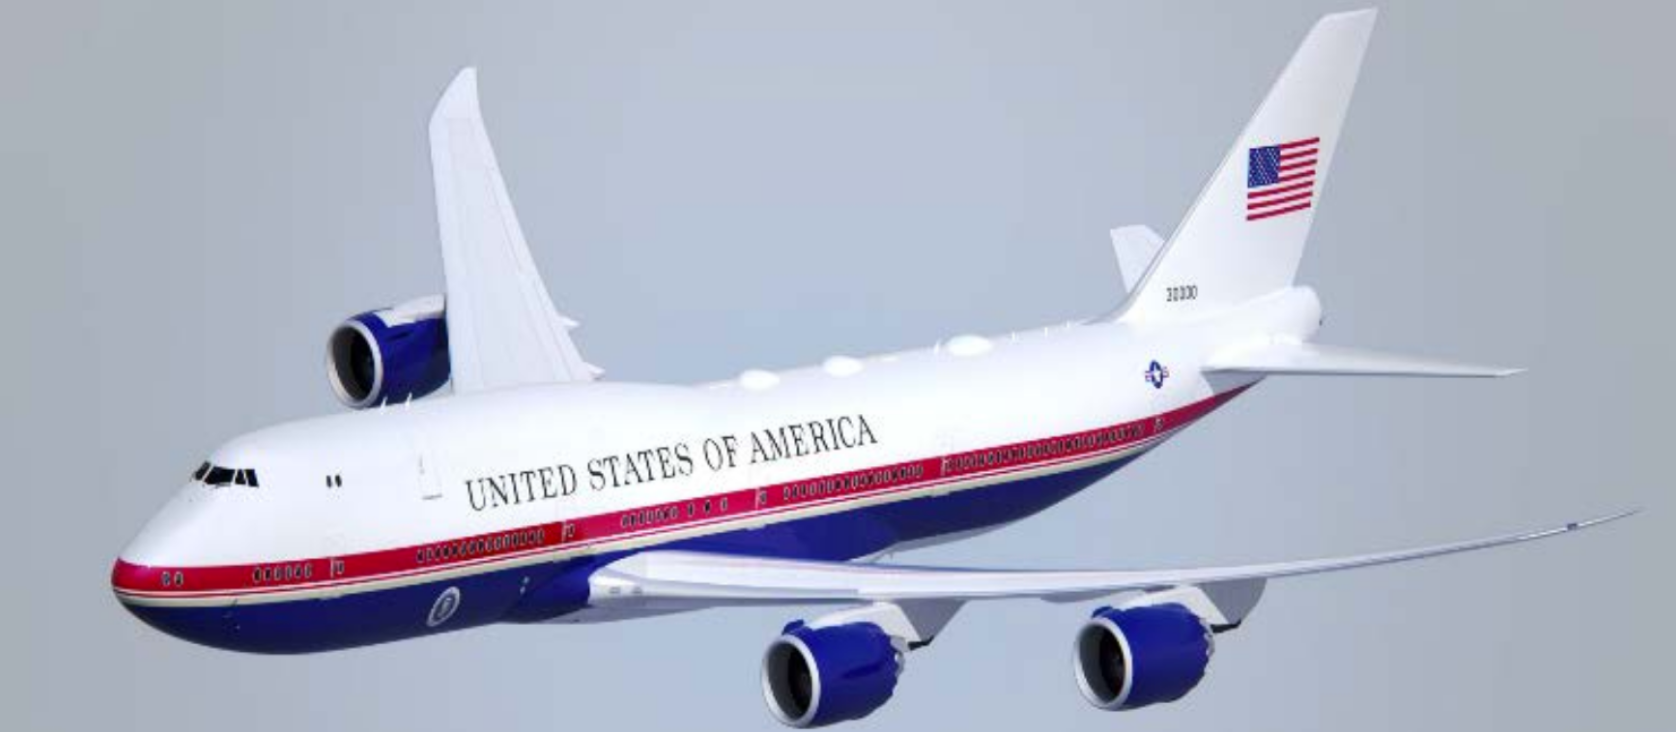 An Air Force One livery paint scheme proposed by President Trump.